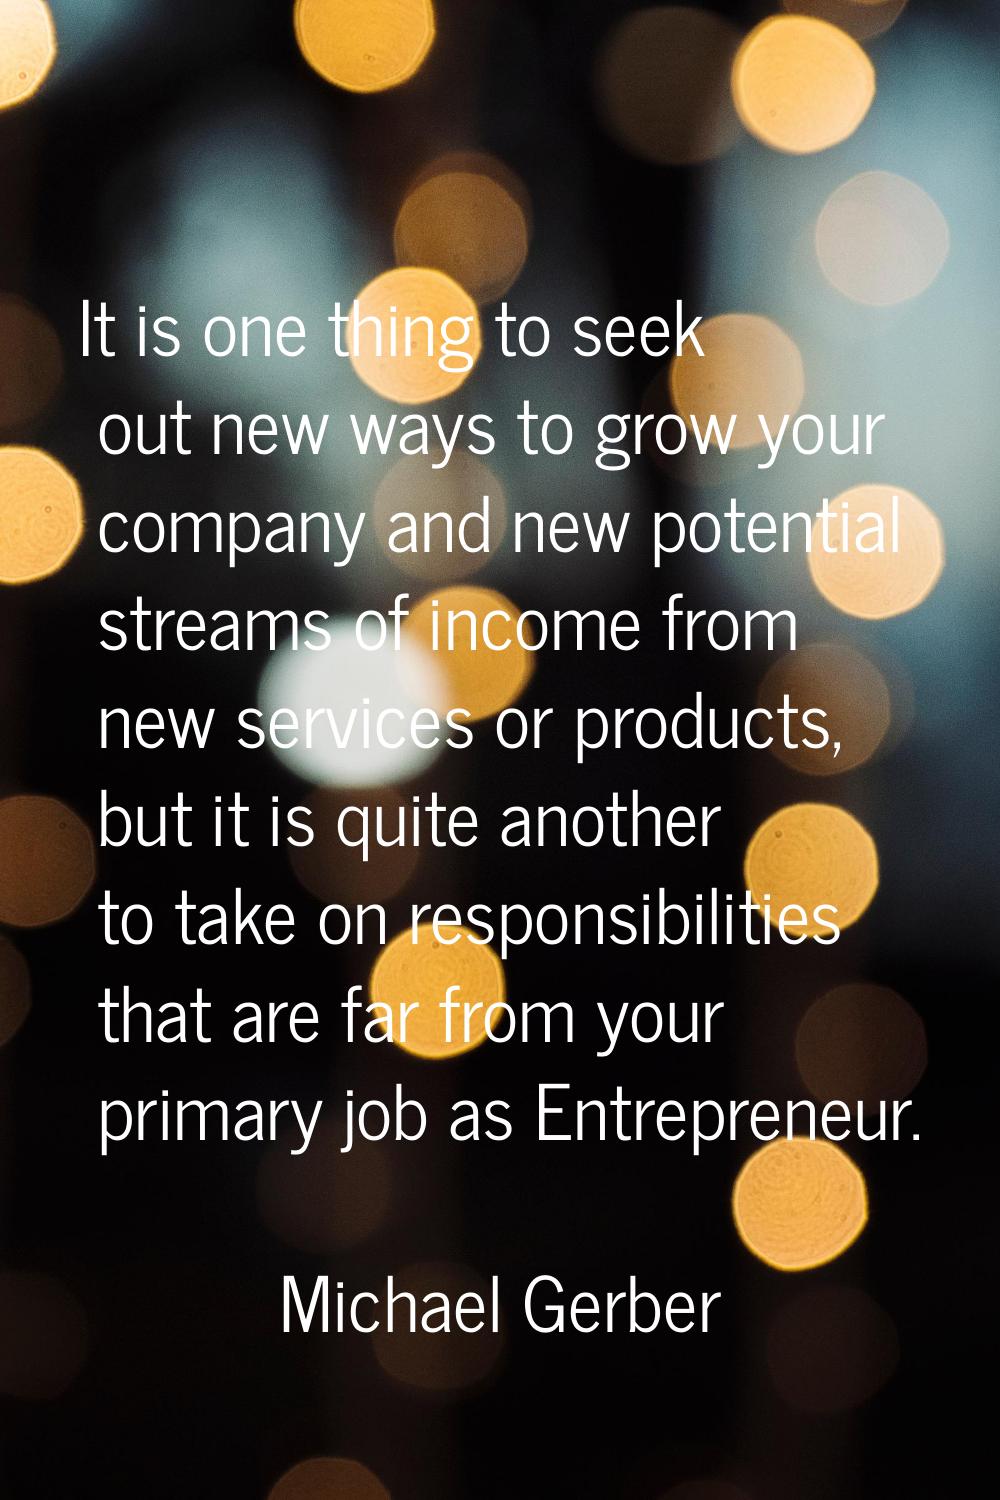 It is one thing to seek out new ways to grow your company and new potential streams of income from 